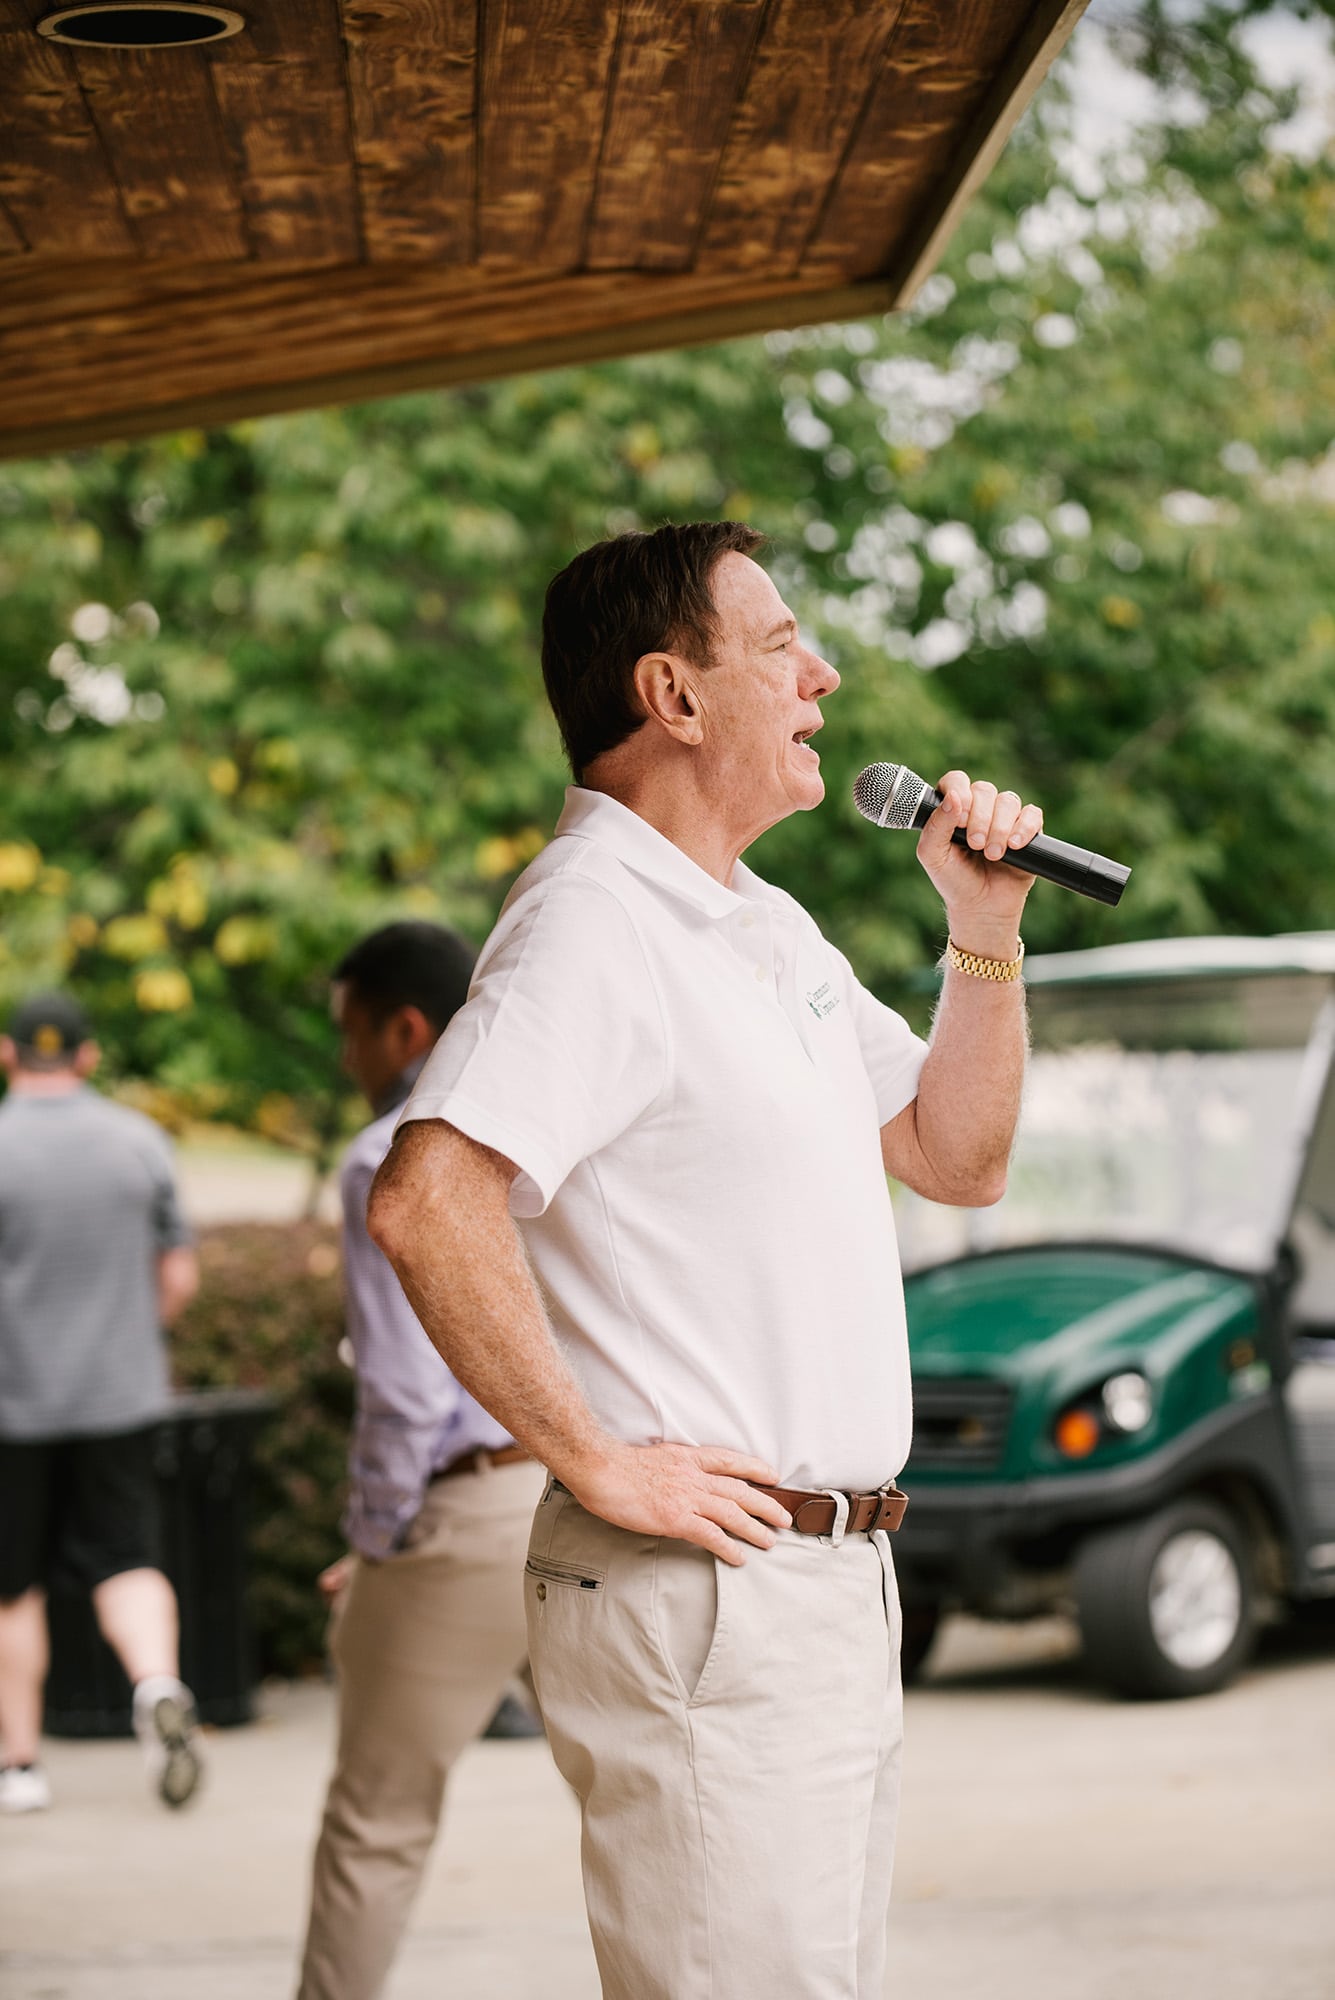 On October 5th, 2020 Community Options, Inc. hosted its golf outing at TPC Jasna Polana in Princeton, New Jersey.